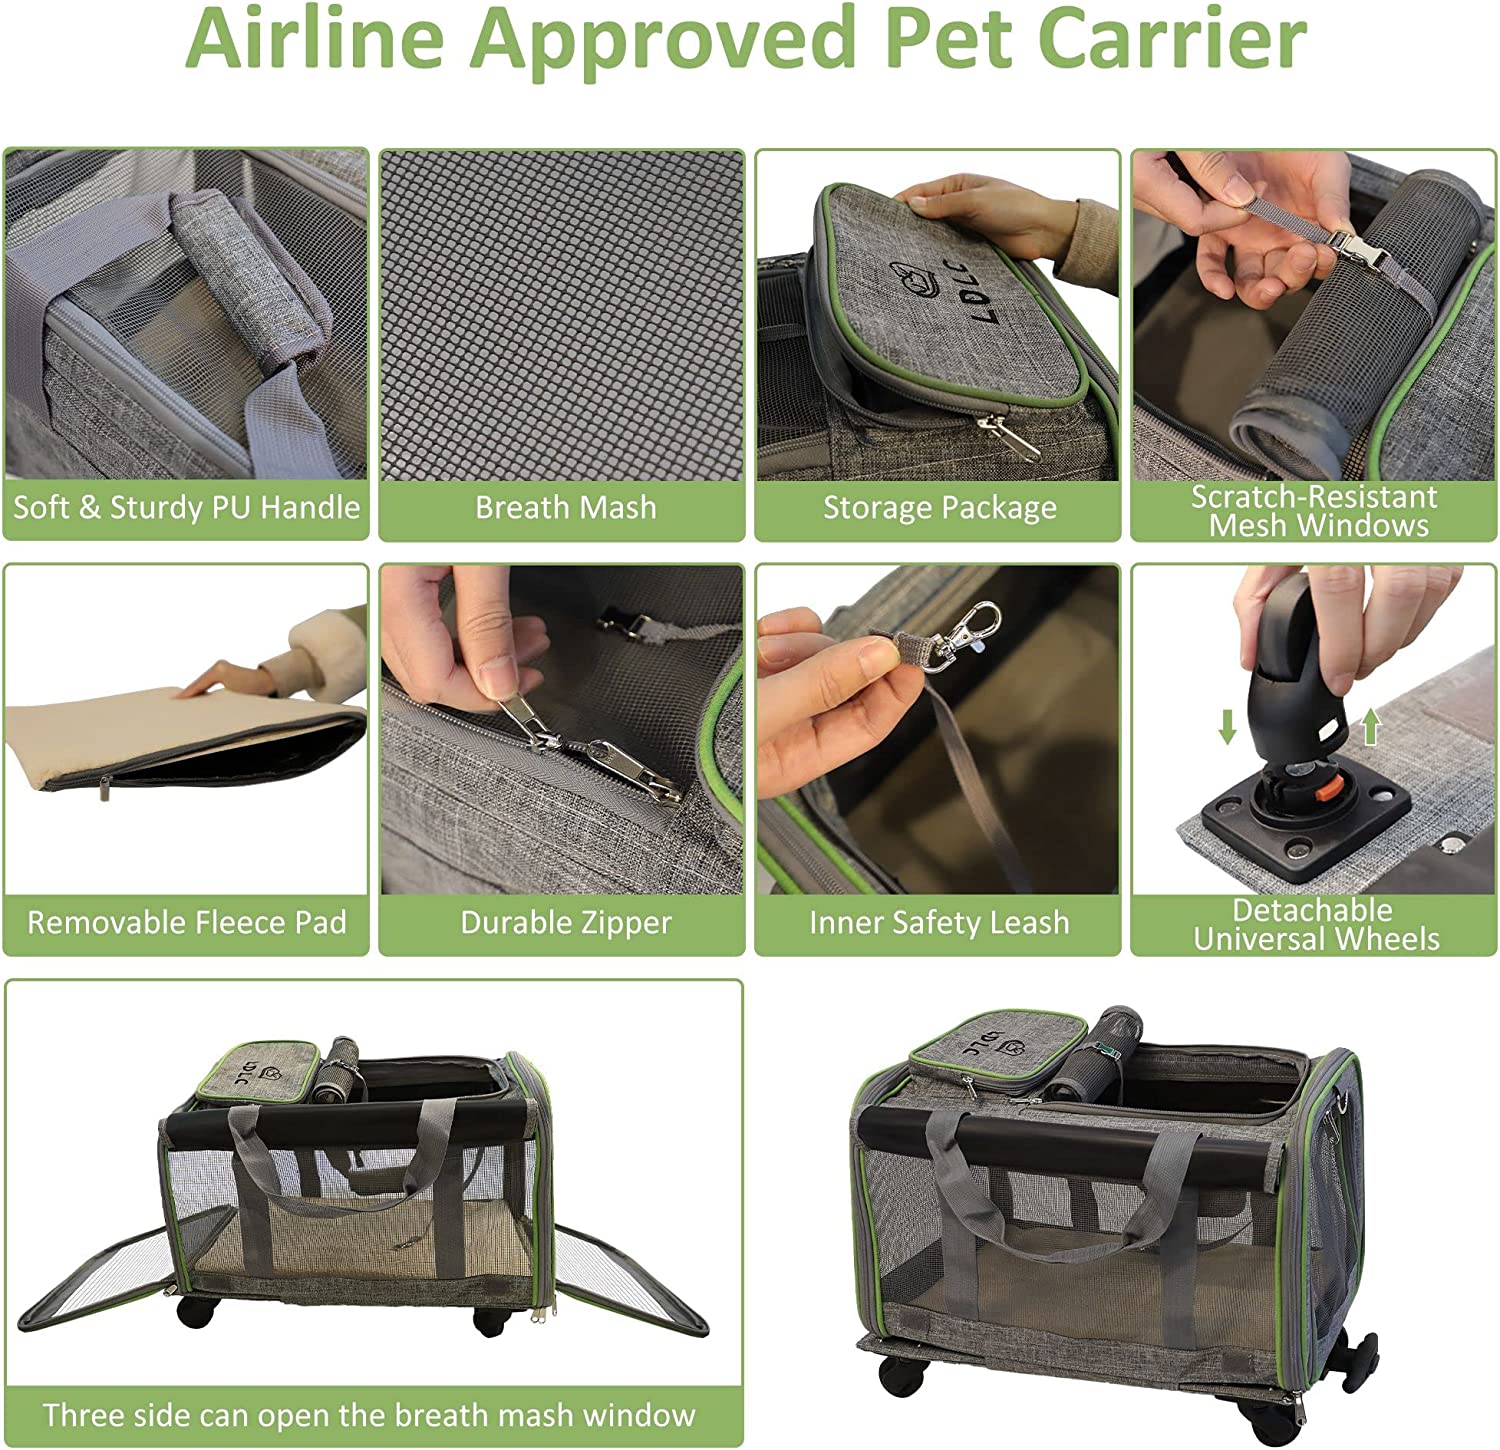 Cupets Travel Pet Carrier with Detachable Wheels, Airline Approved Cat & Dog Carrier